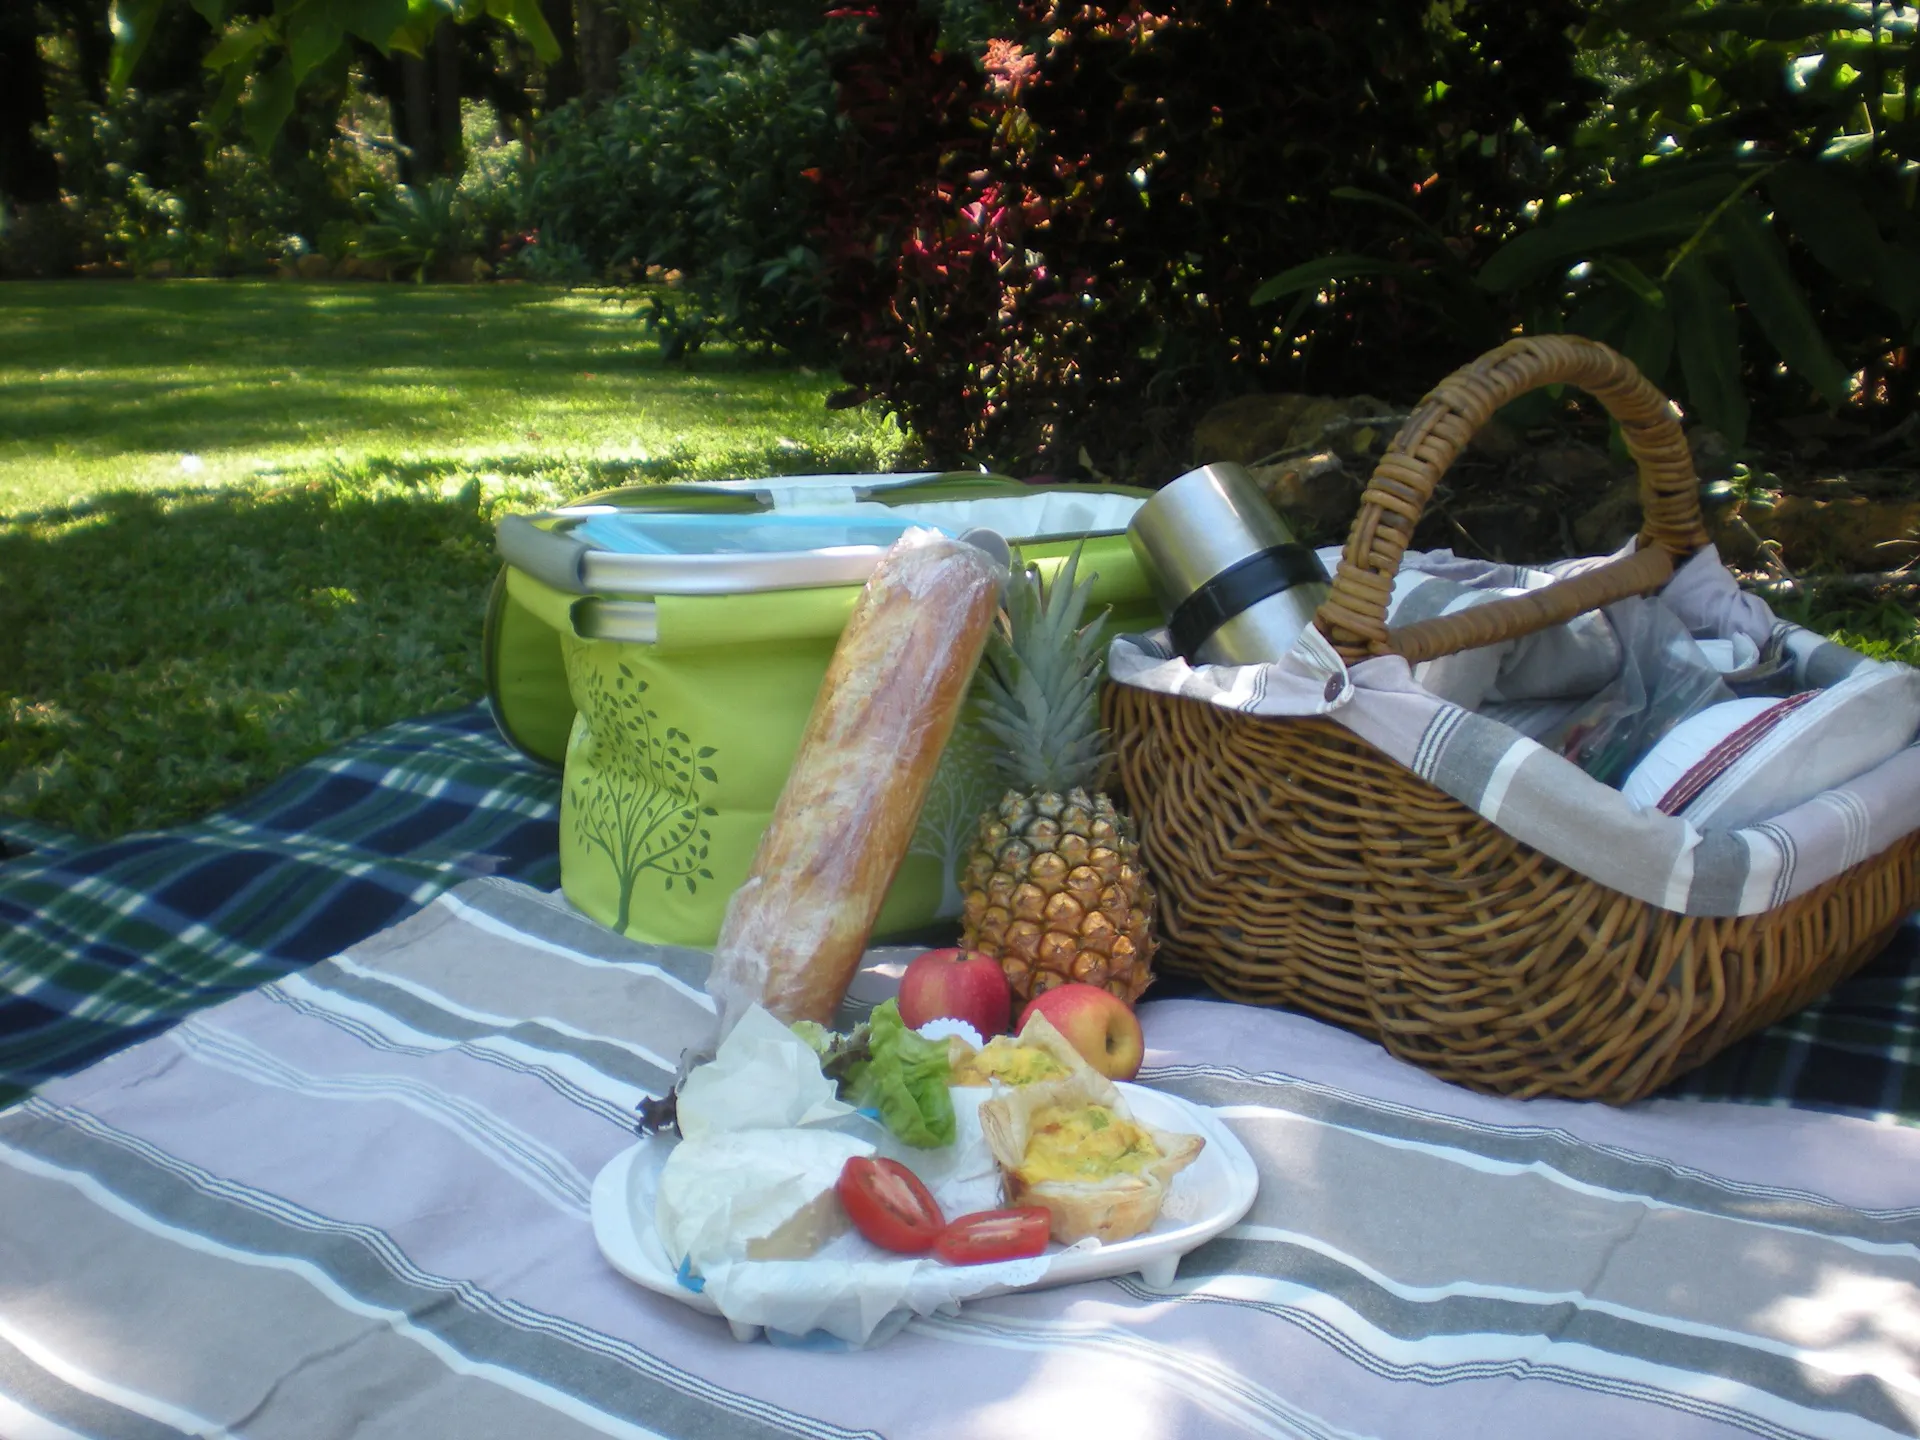 Picnic hampers available to enjoy in the gardens or in the Hinterland region